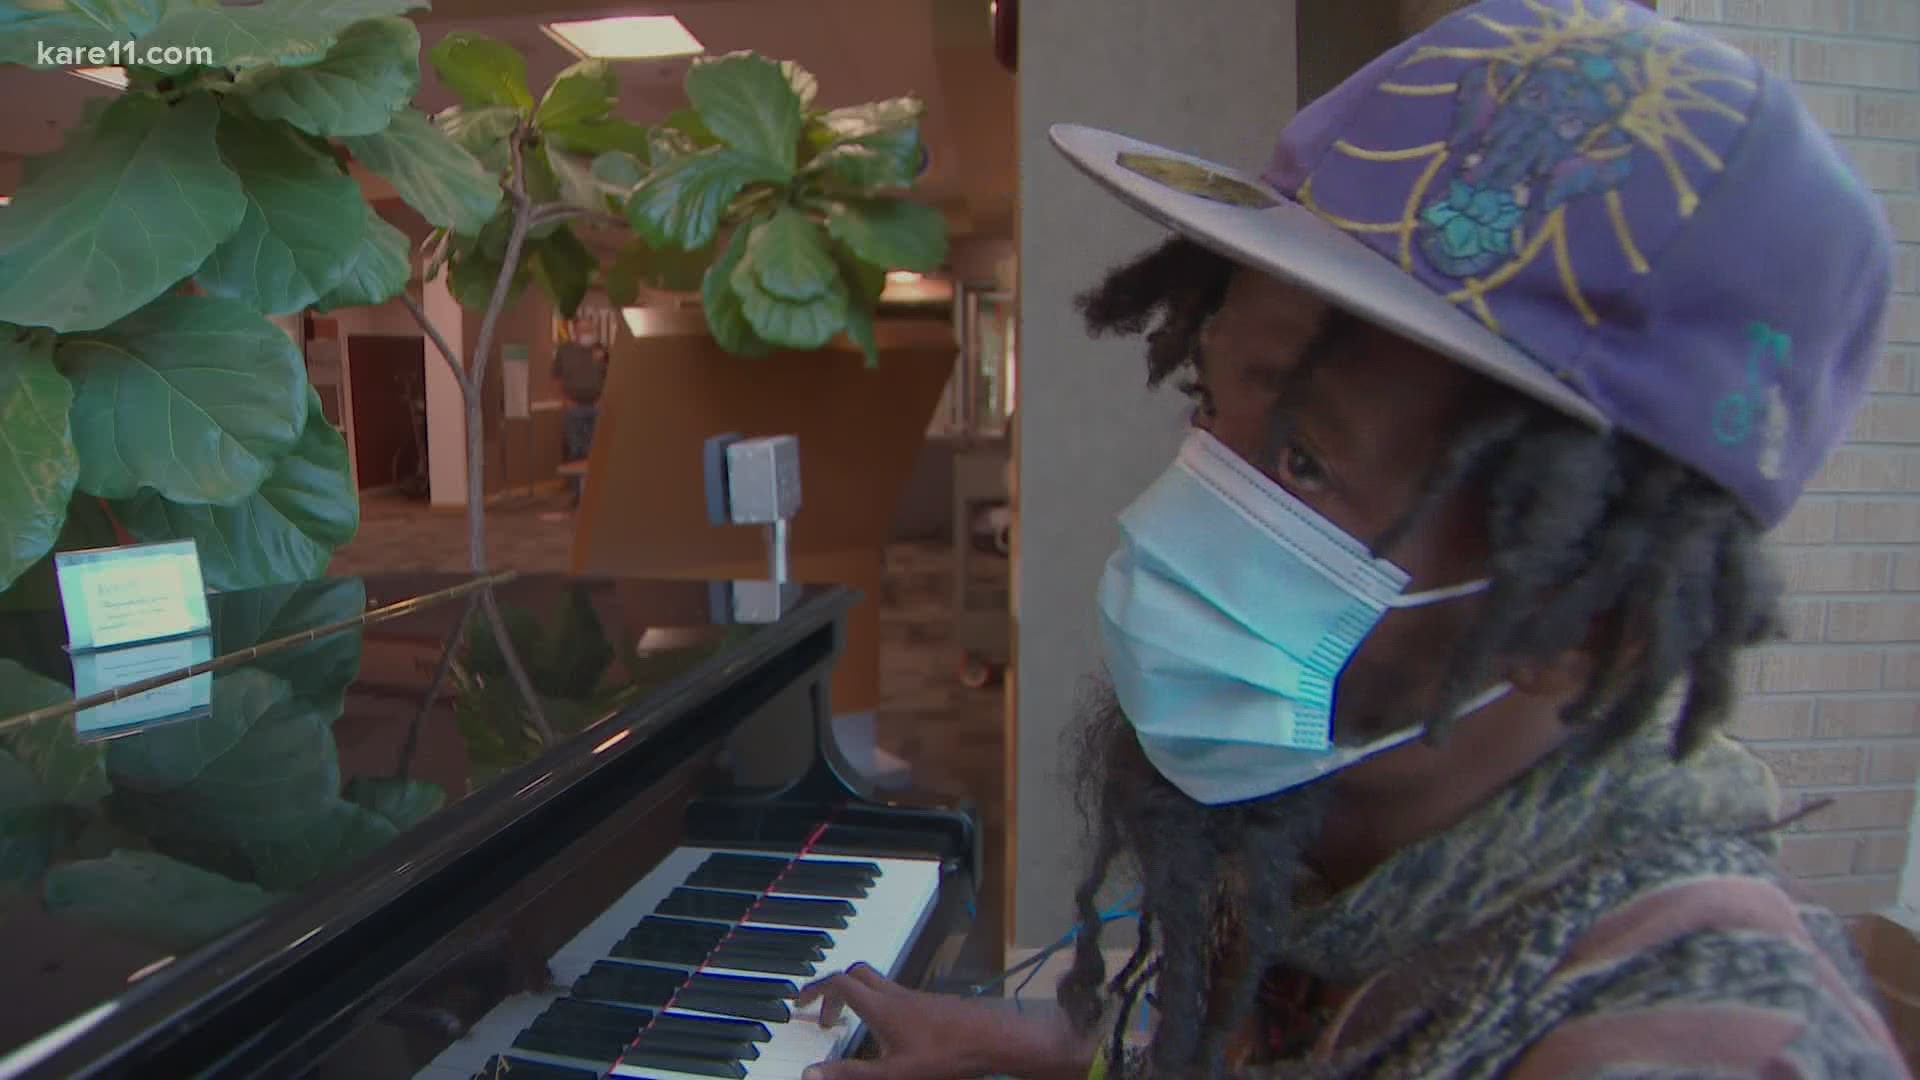 Chris Rep has been playing piano while his girlfriend recovers at North Memorial Health Hospital